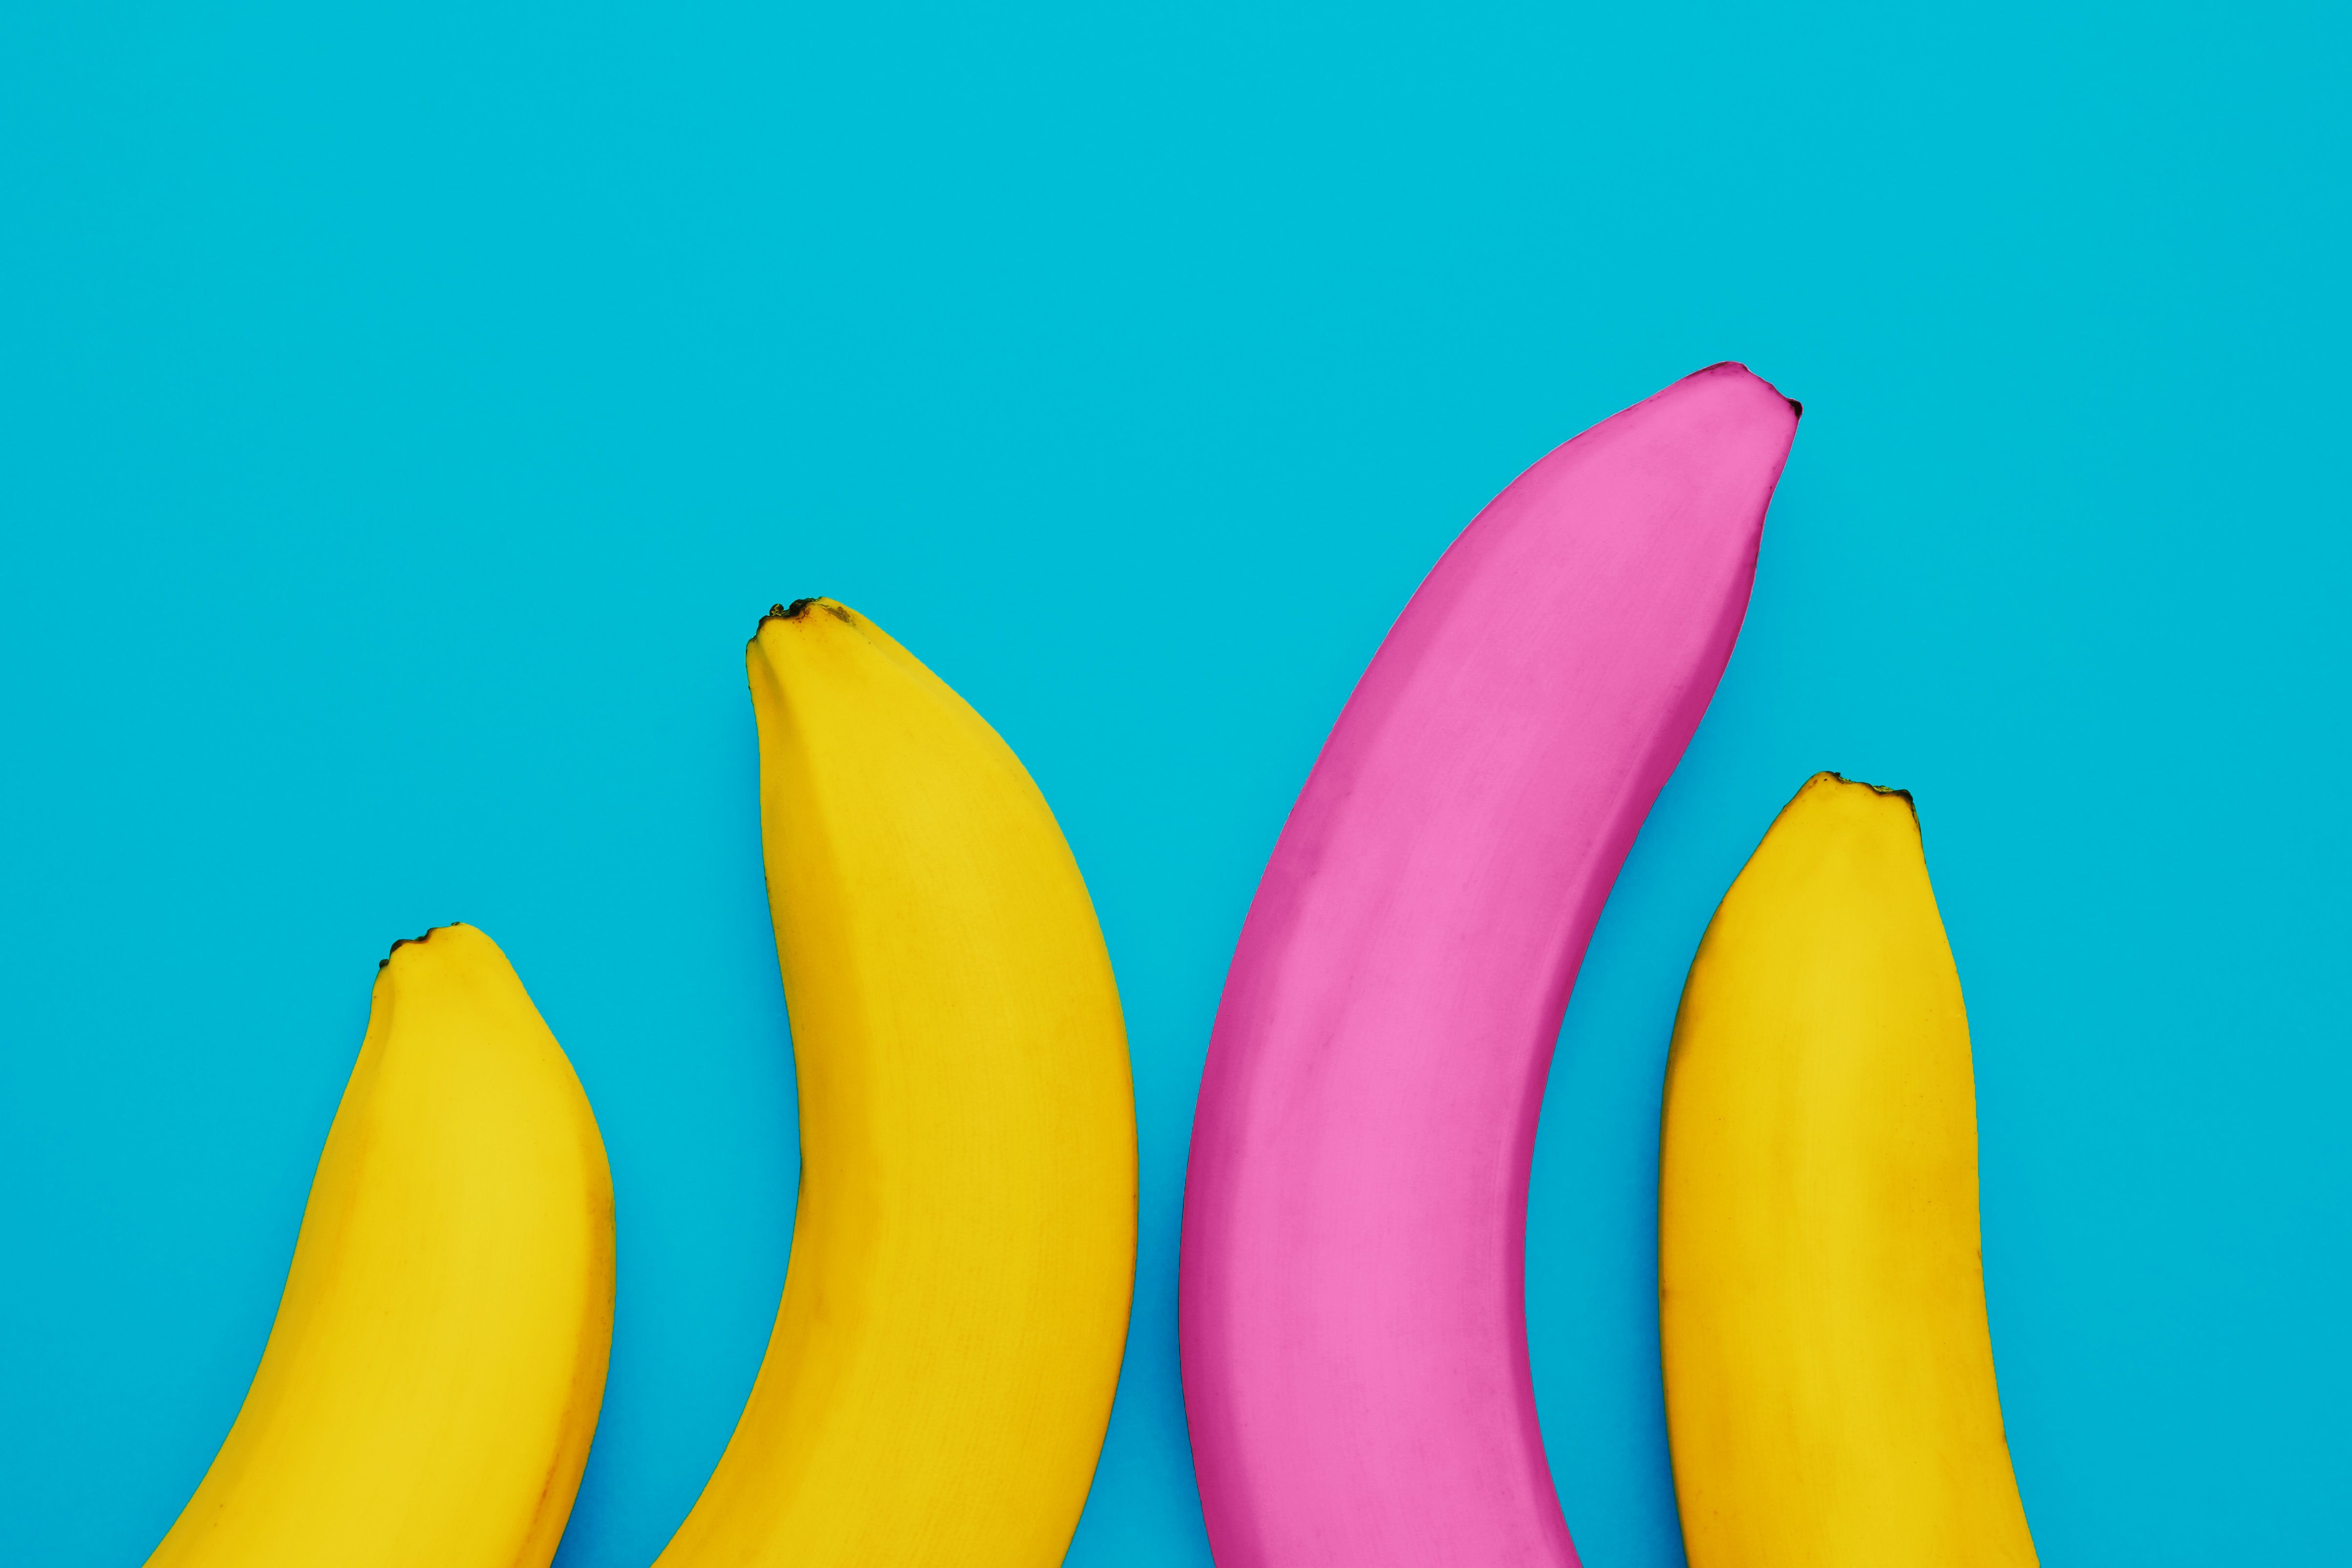 a unique pink banana among the yellow ones as a concept for a male penis provocatively large size, potency and prostate problems choosing the perfect lover